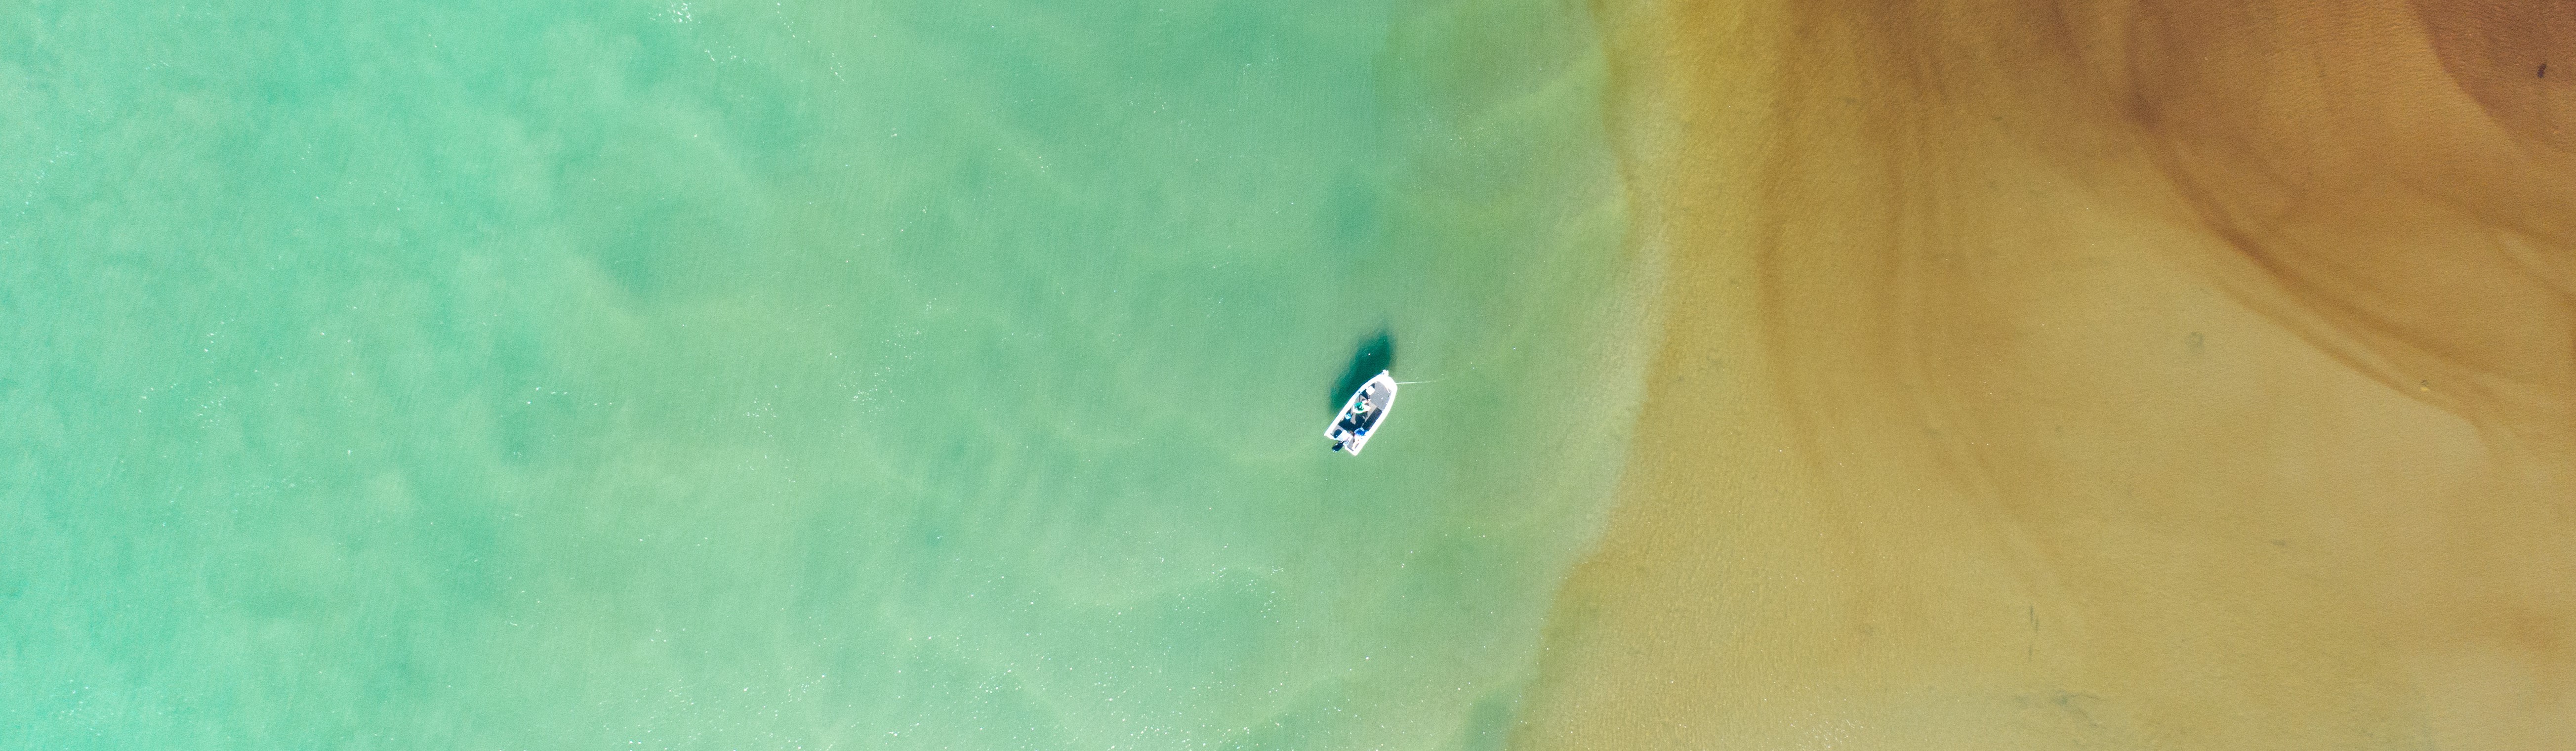 Aerial photo over NSW shoreline with boat floating in shallow water